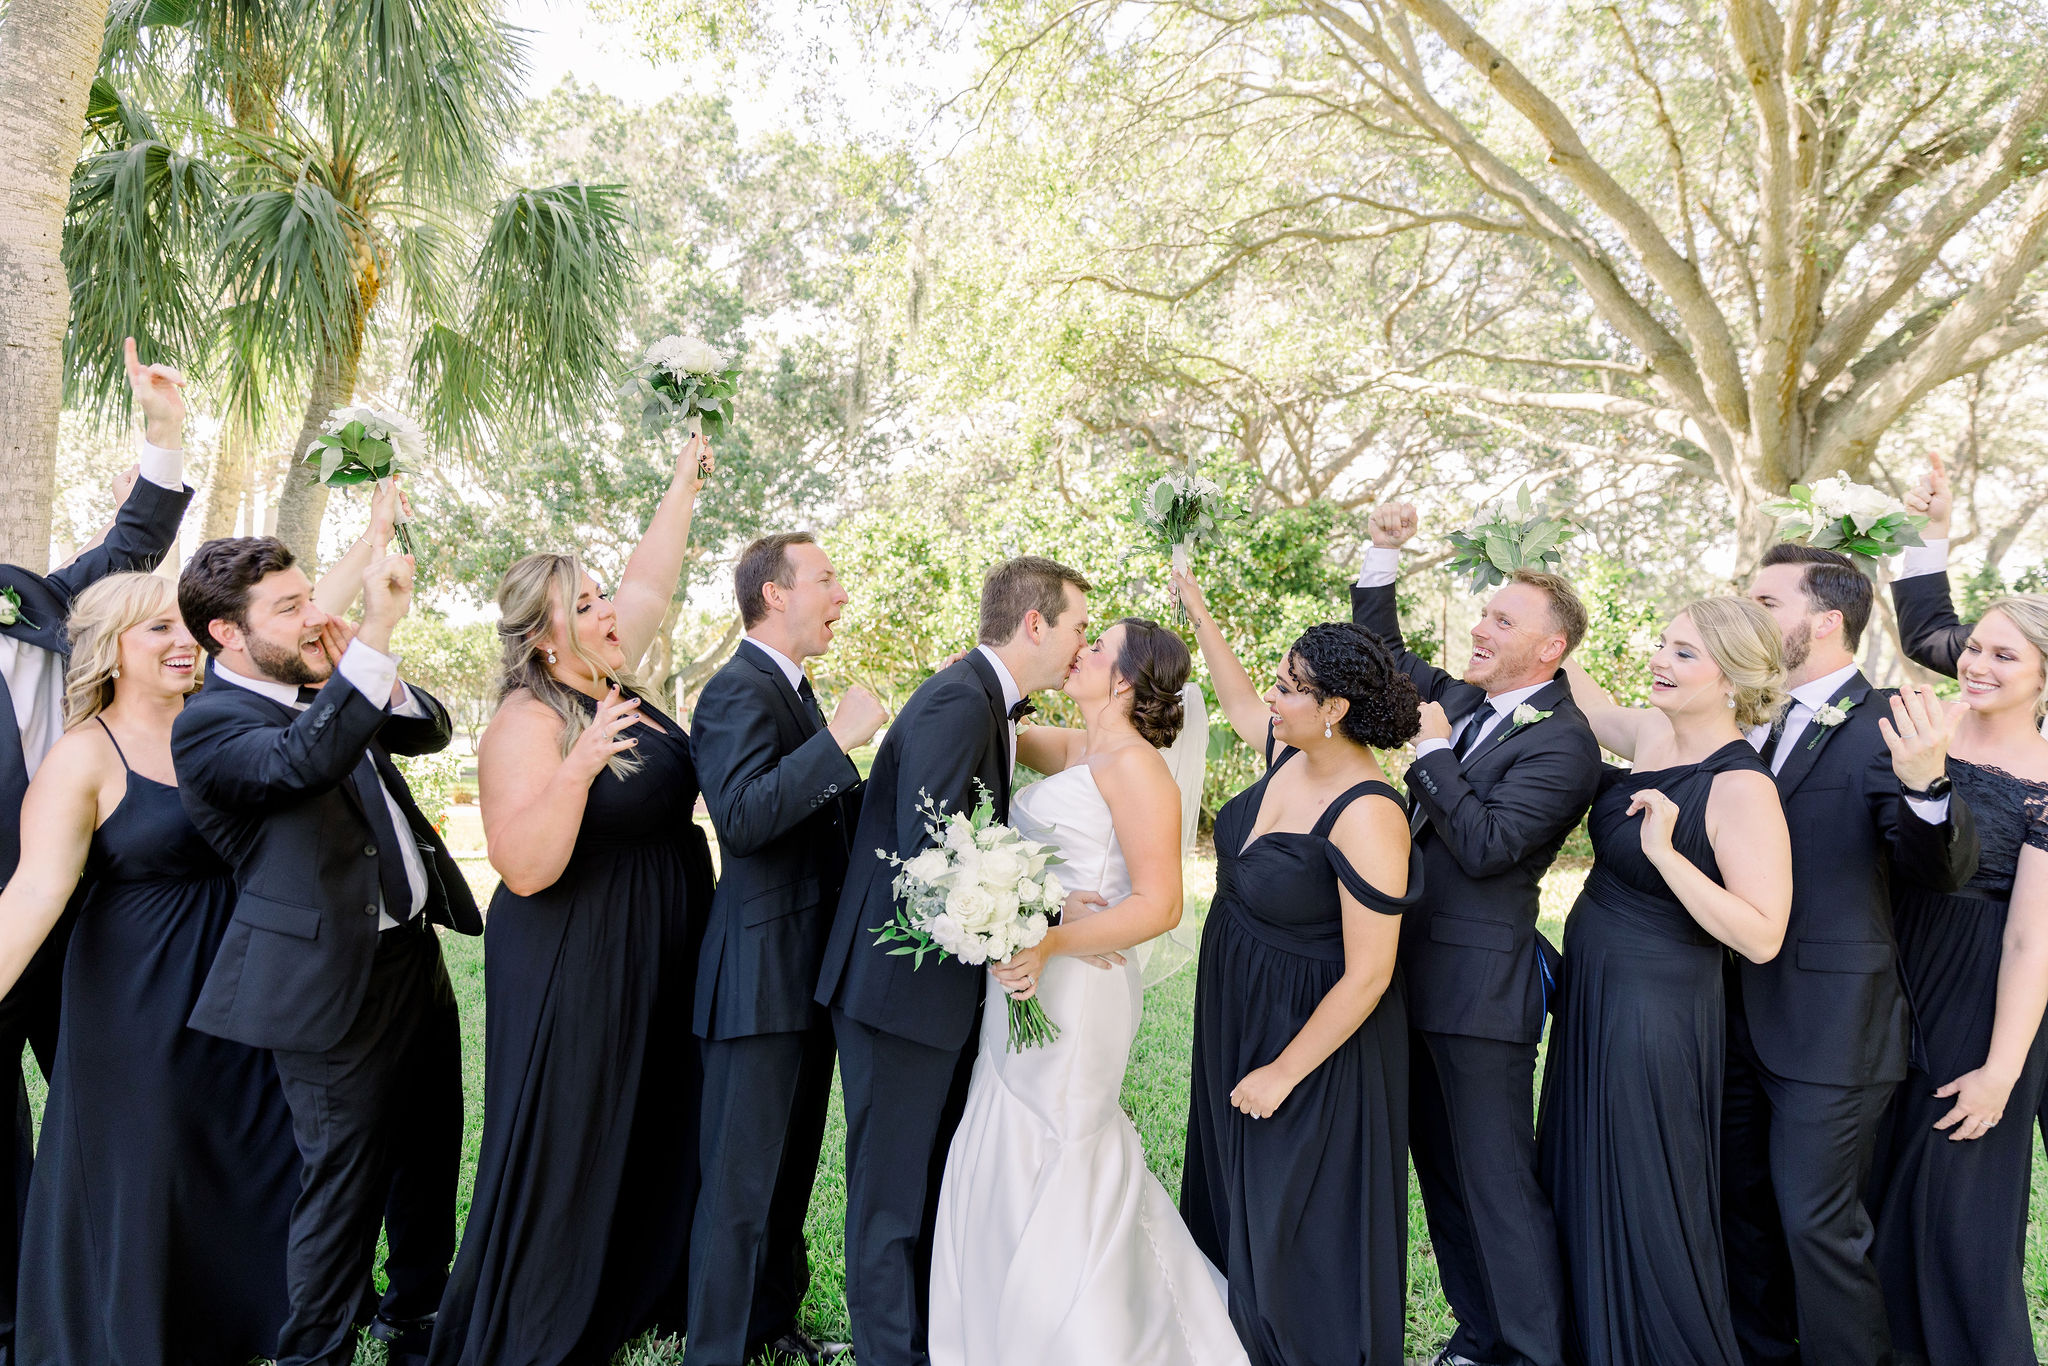 A bridal party cheer as the bride and groom kiss on golf greens in Manatee County, Florida by Jommy Photography. A high-end wedding photographer in the Manatee County area. Fun wedding portraits with the bridal party.
